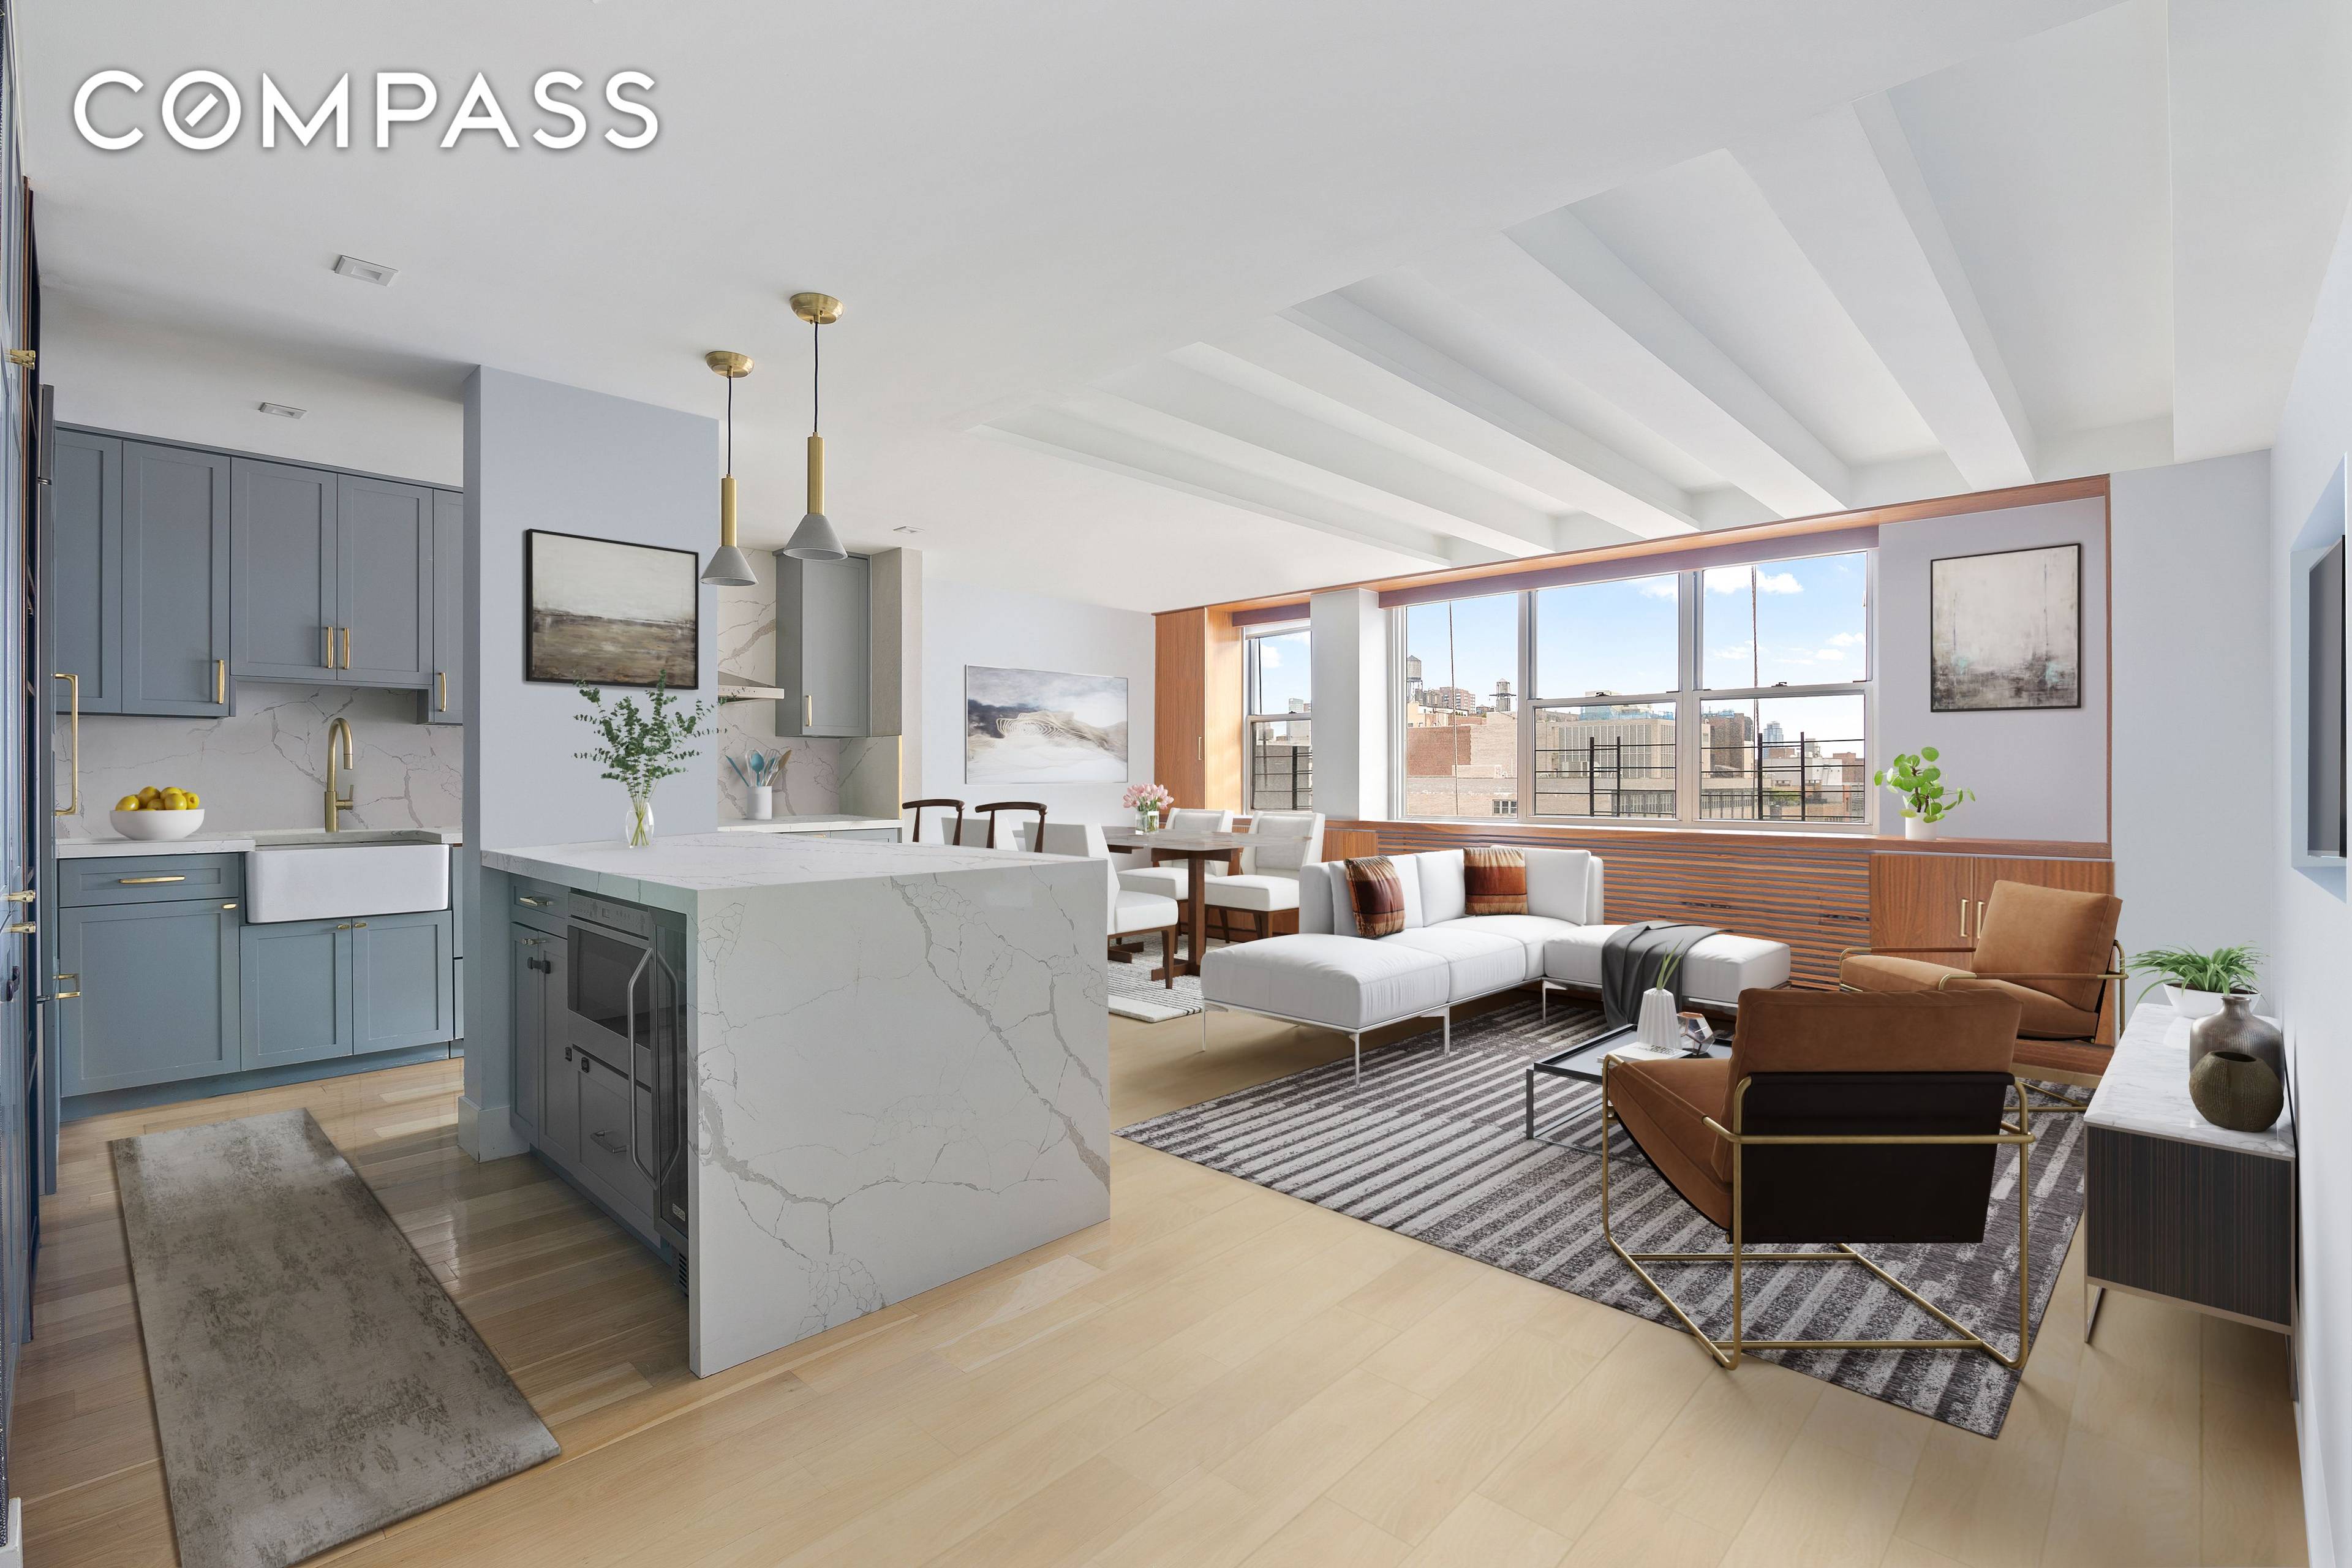 Score one of the city's most coveted possessions a key to Gramercy Park with this stunning three bedroom, two bathroom designer showplace in a full service co op building.